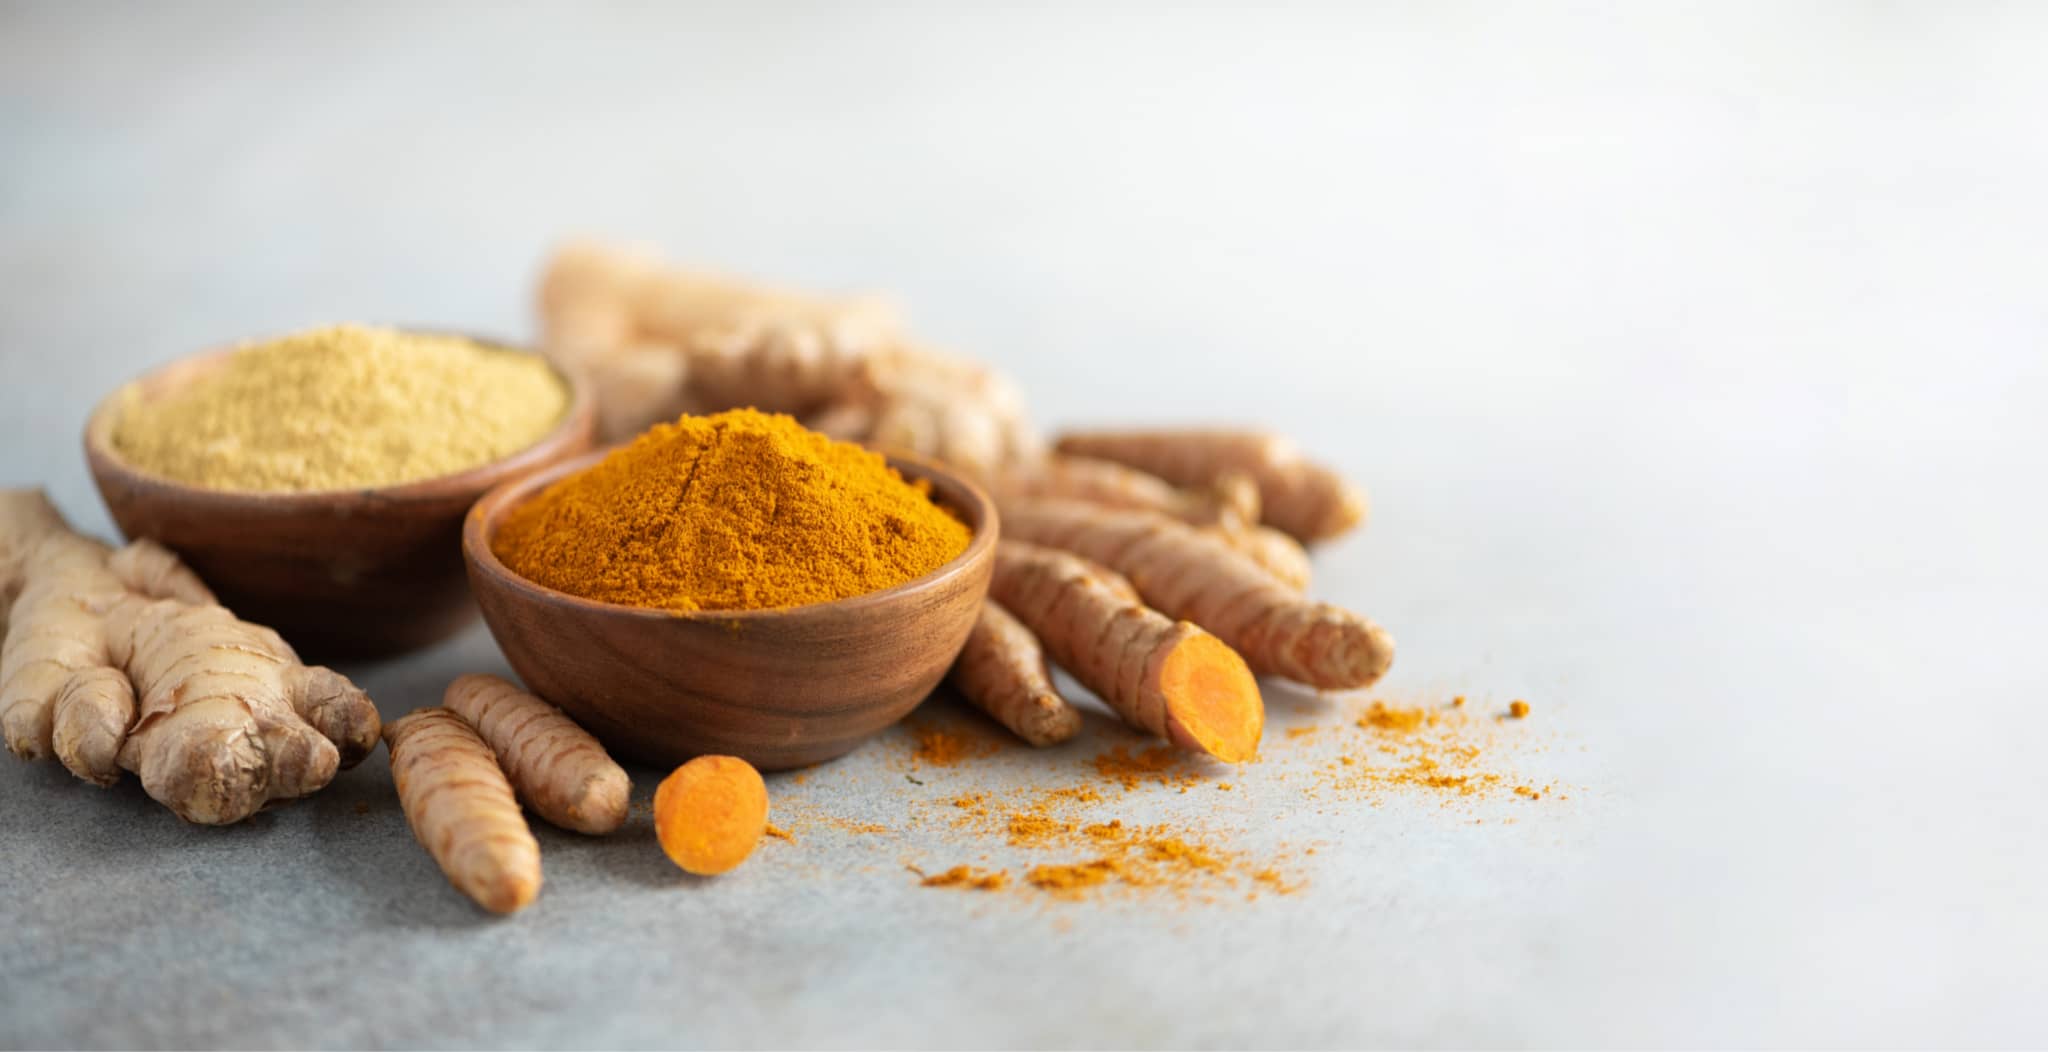 EQU Streamz blog article on Turmeric and its use on horses